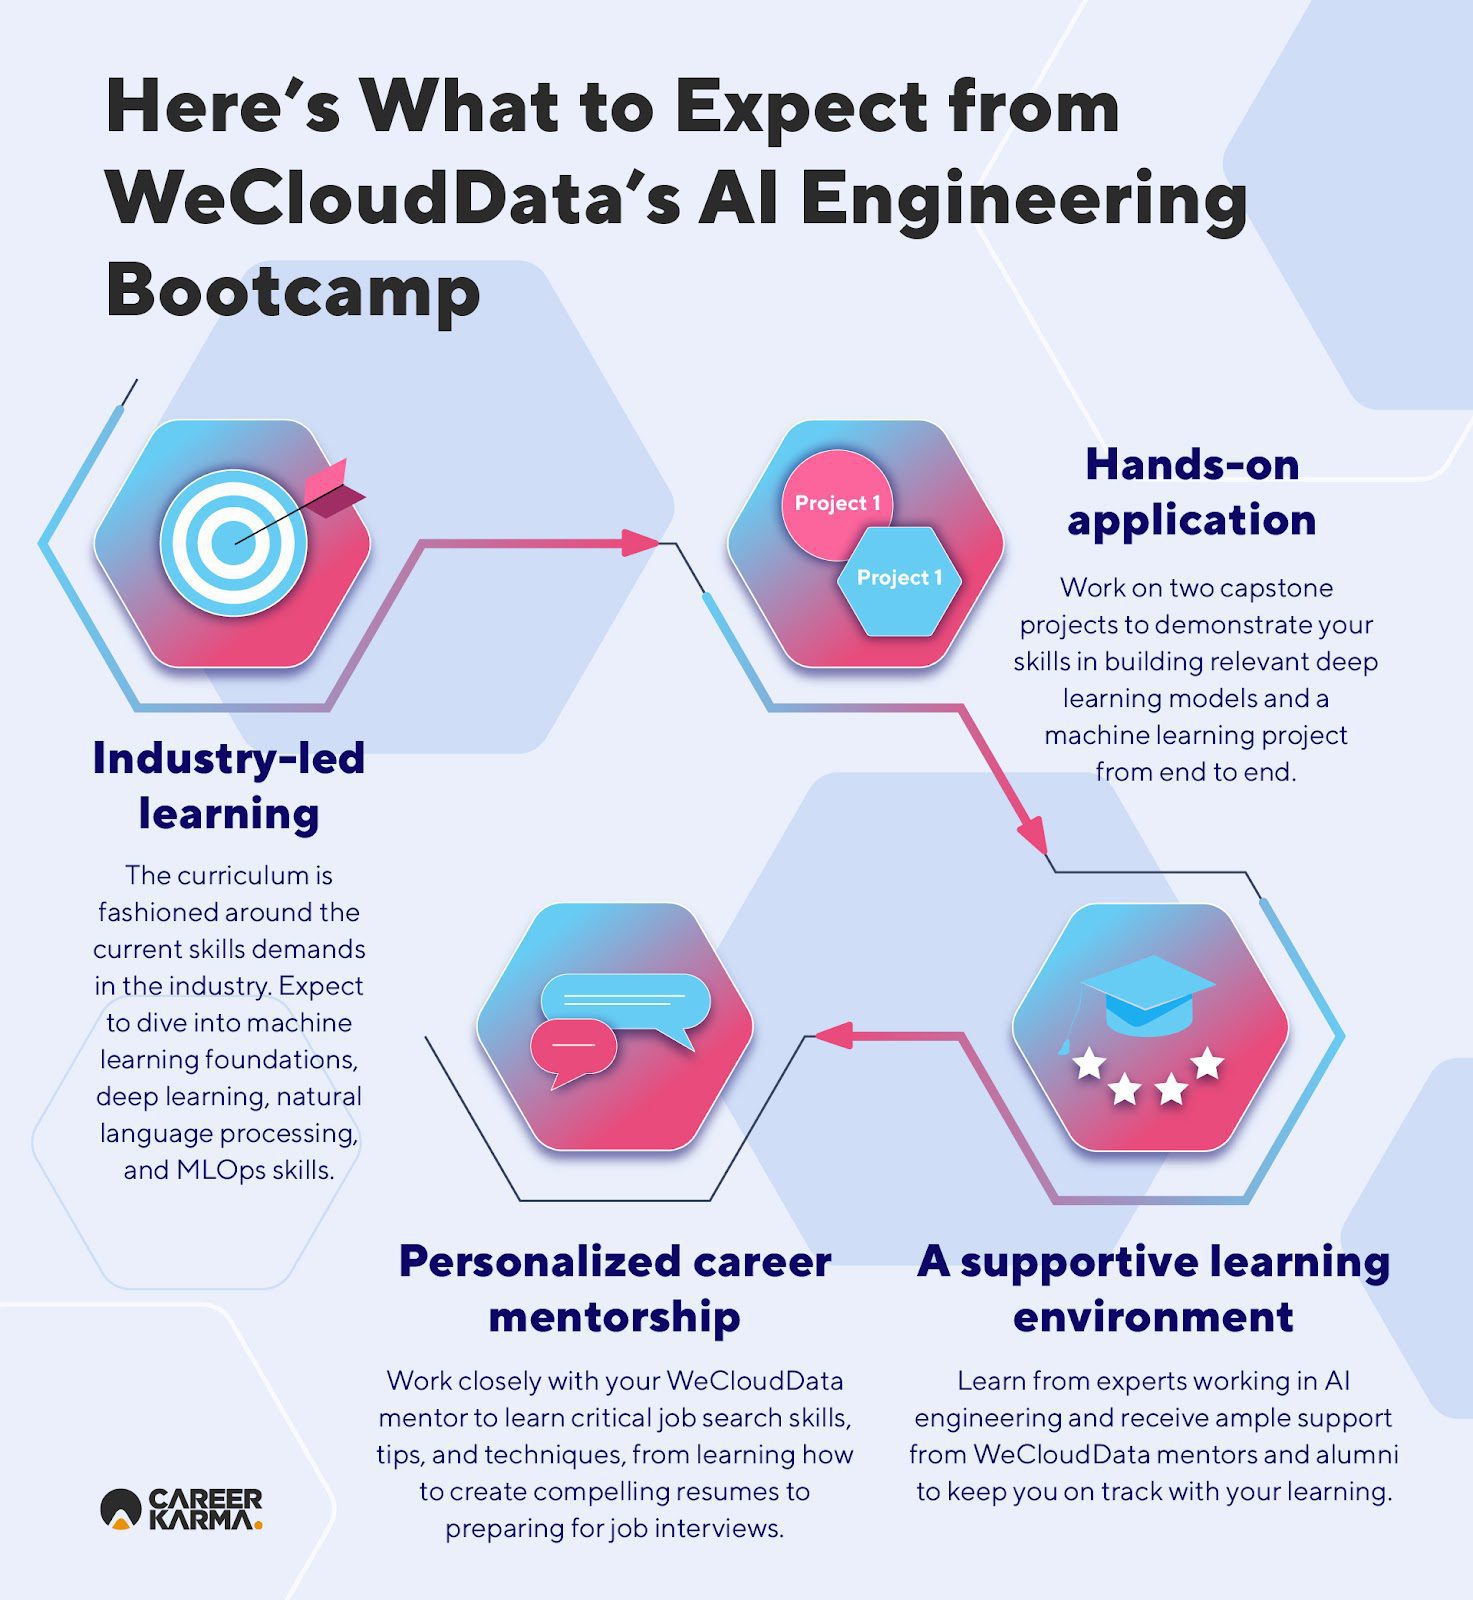 An infographic showing what students can expect from WeCloudData AI Engineering Bootcamp